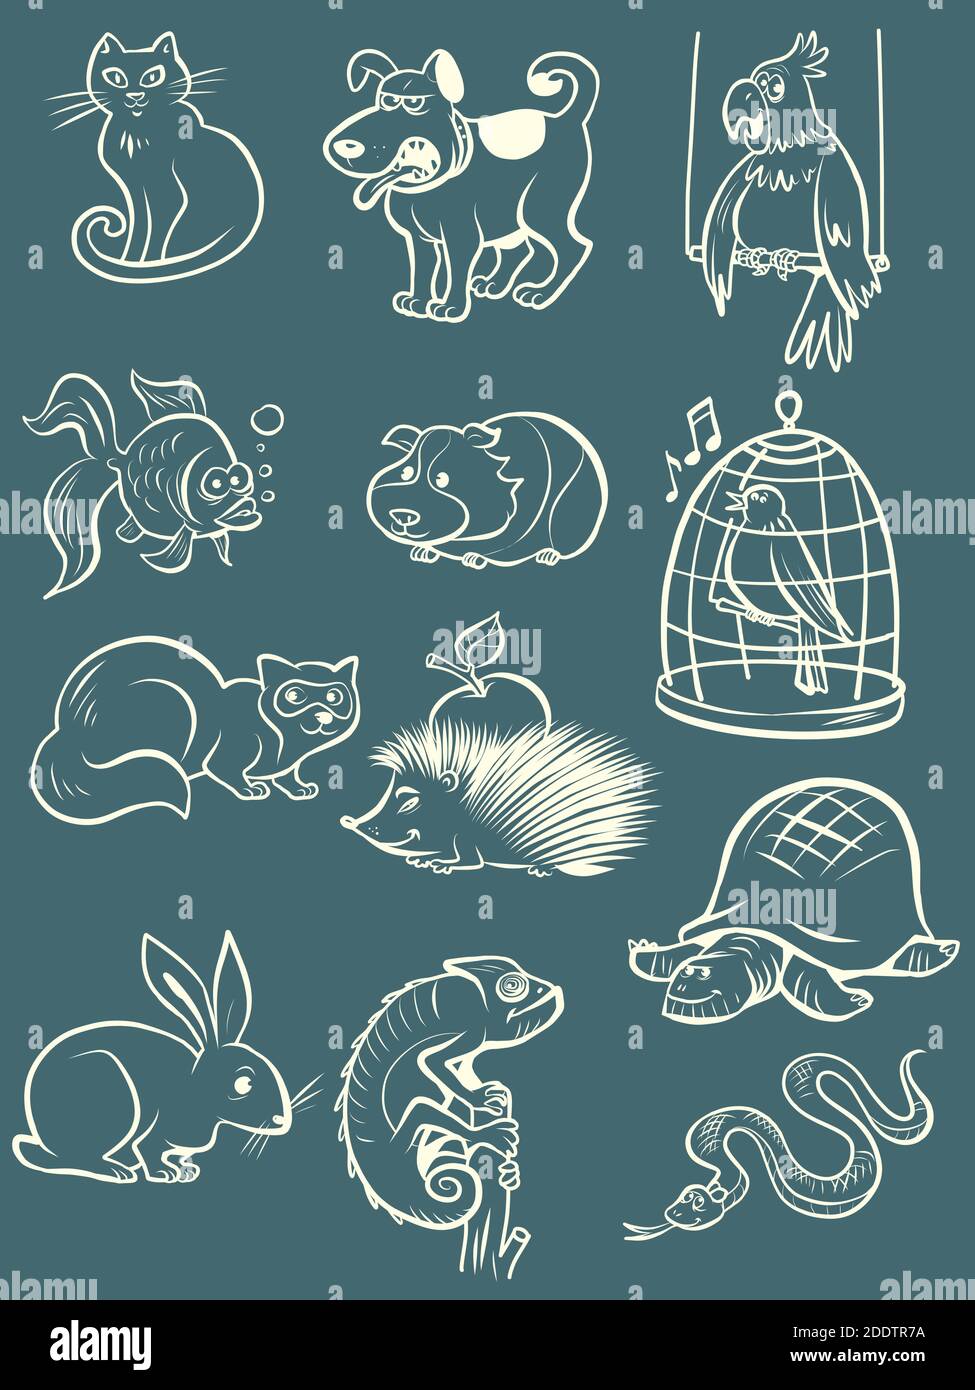 Pets animals collection set icons symbols sketch hand drawing Stock Vector